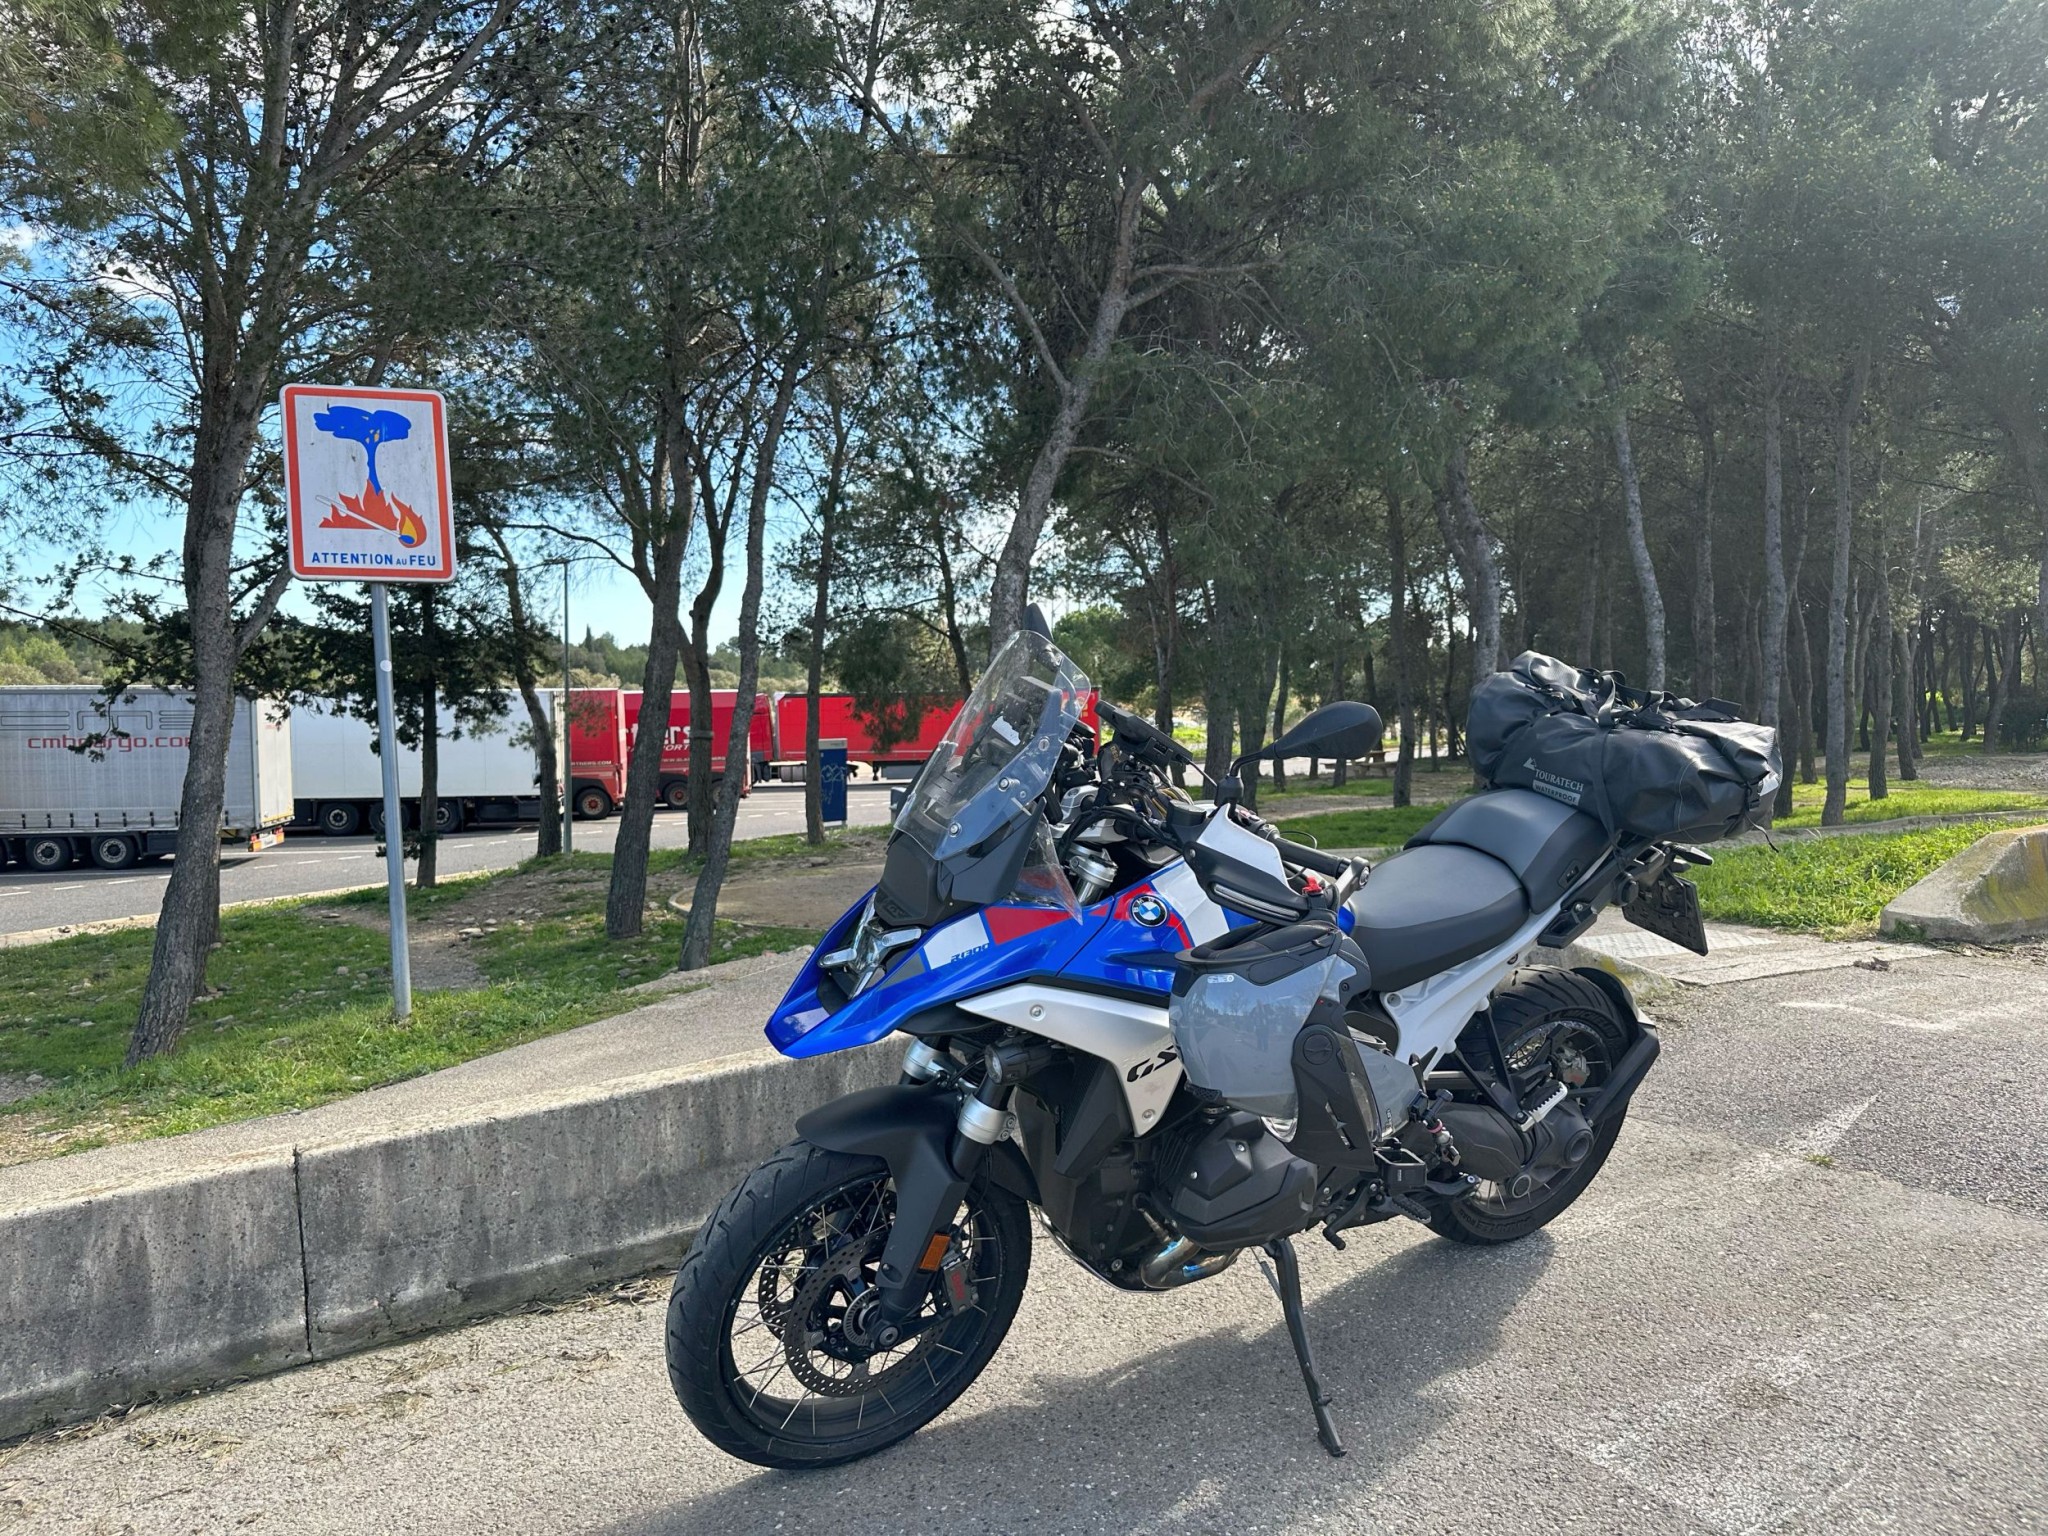 BMW R 1300 GS road test - from Barcelona to Vienna - Image 49